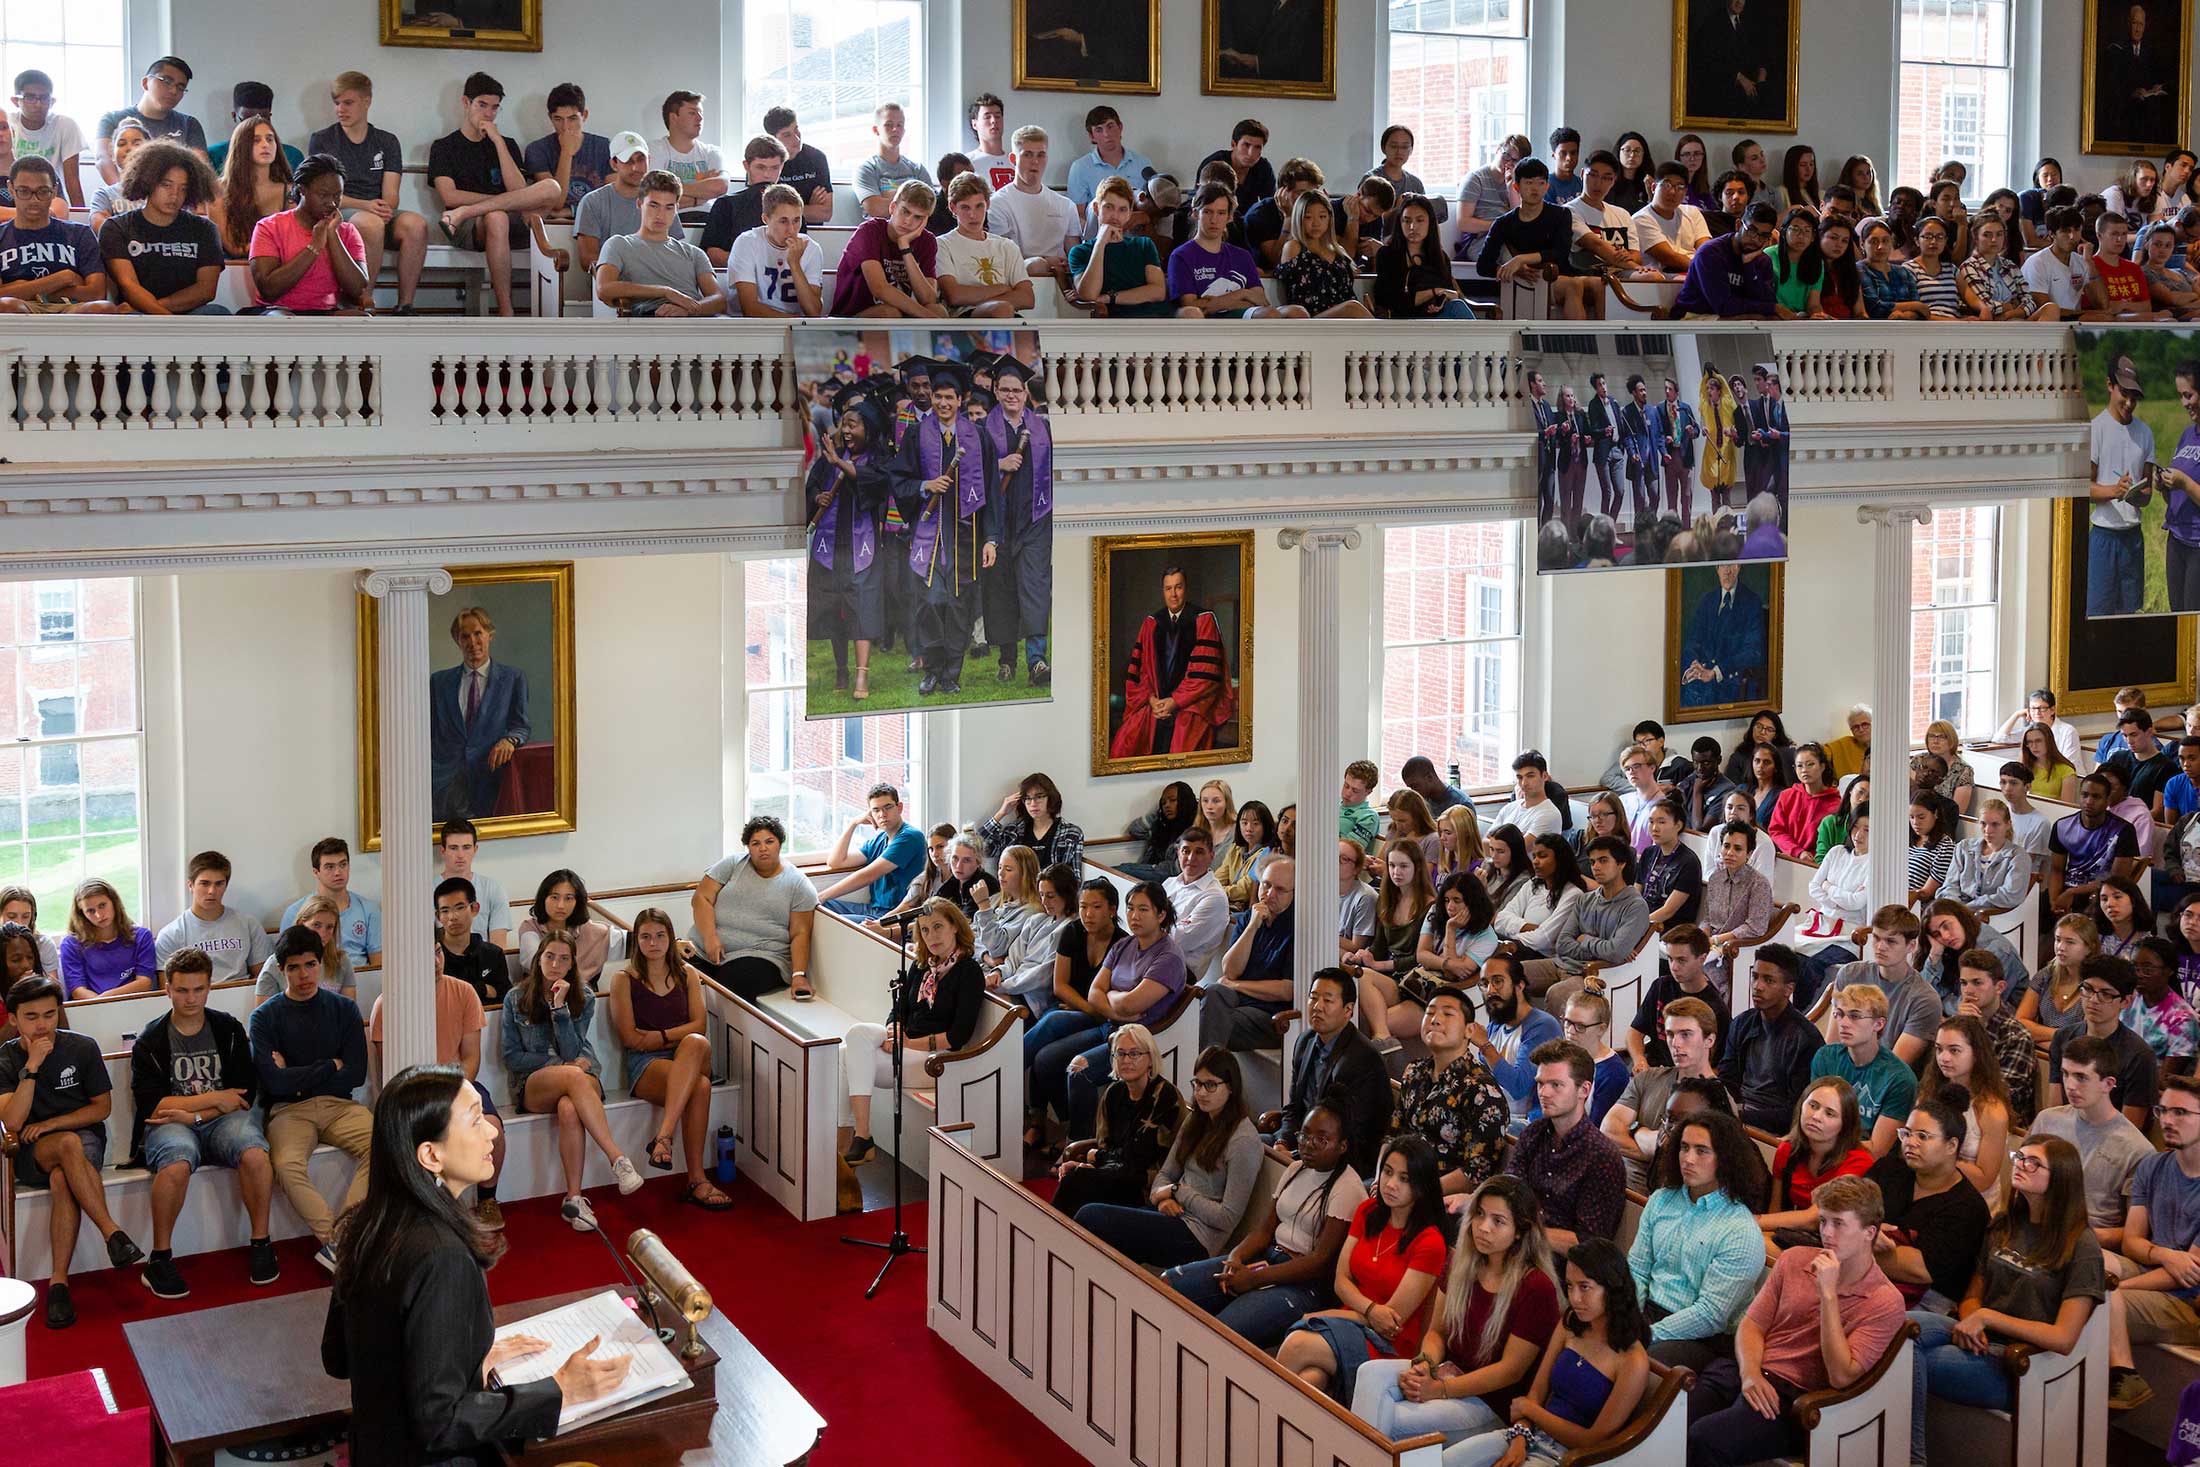 Min Jin Lee speaking to the incoming class.